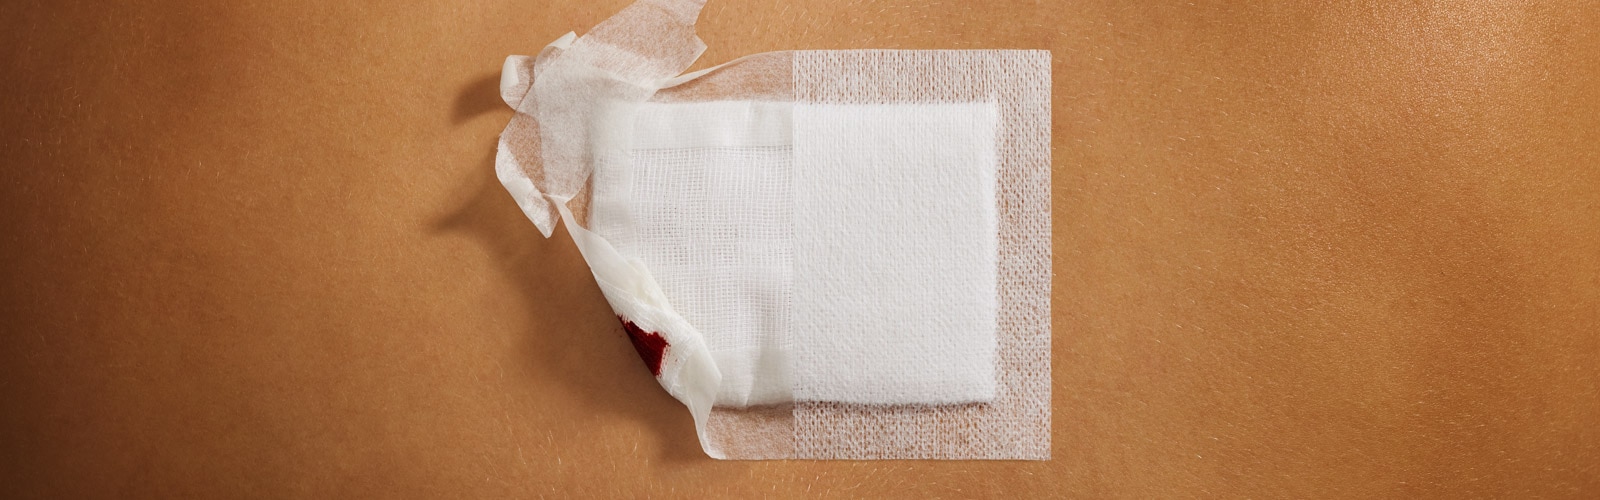 Close-up comparison of surgical tape vs wide area fixation performance on skin over time